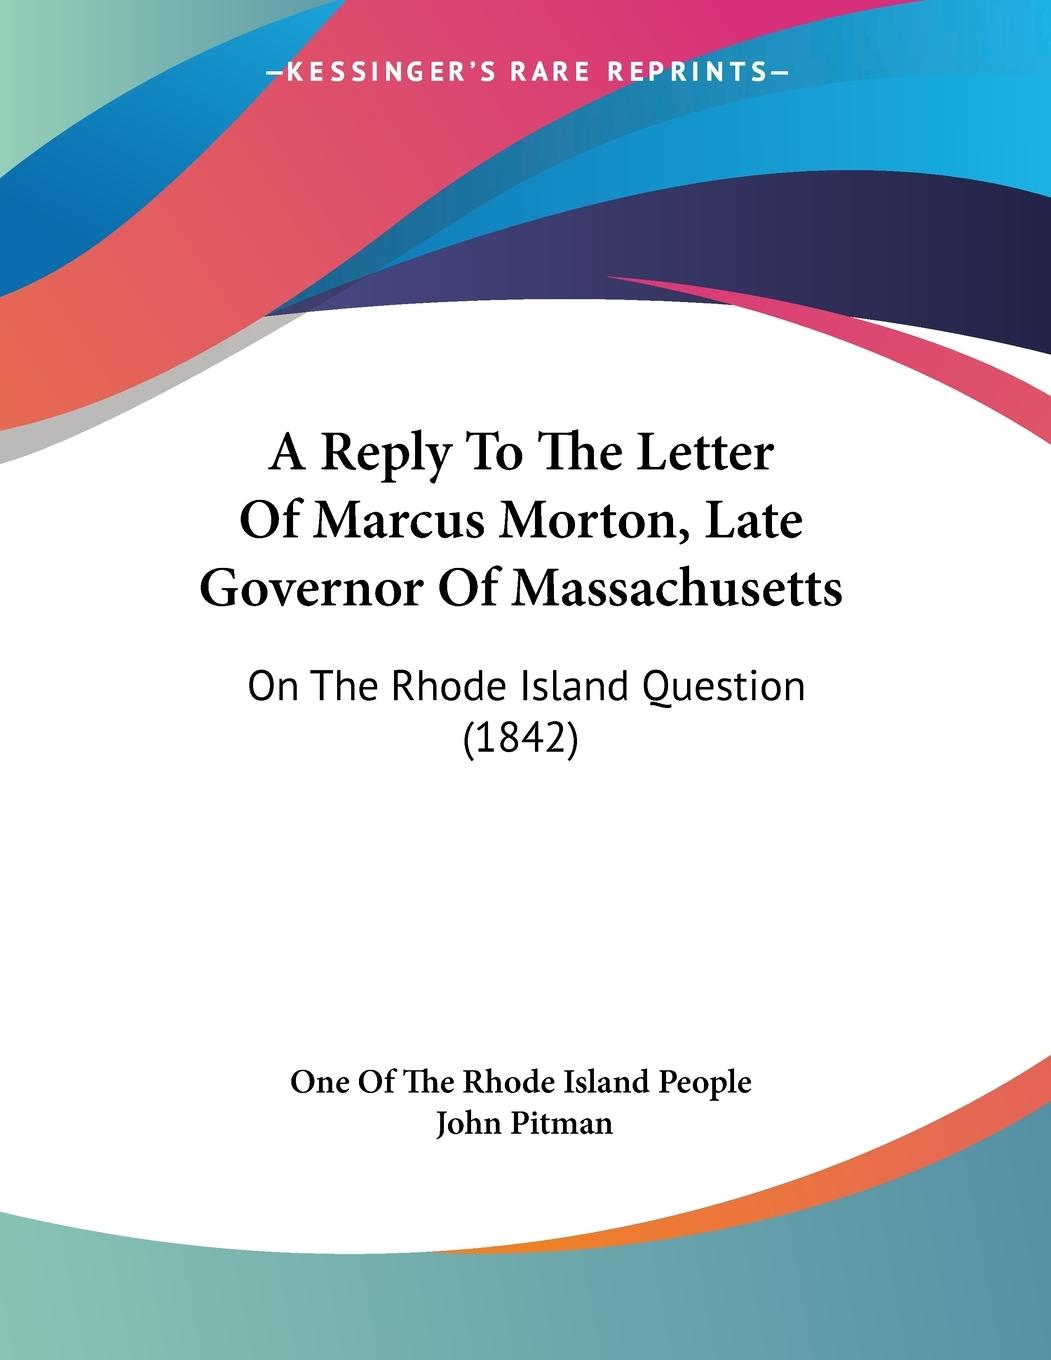 A Reply To The Letter Of Marcus Morton, Late Governor Of Massachusetts - One Of The Rhode Island People Pitman, John